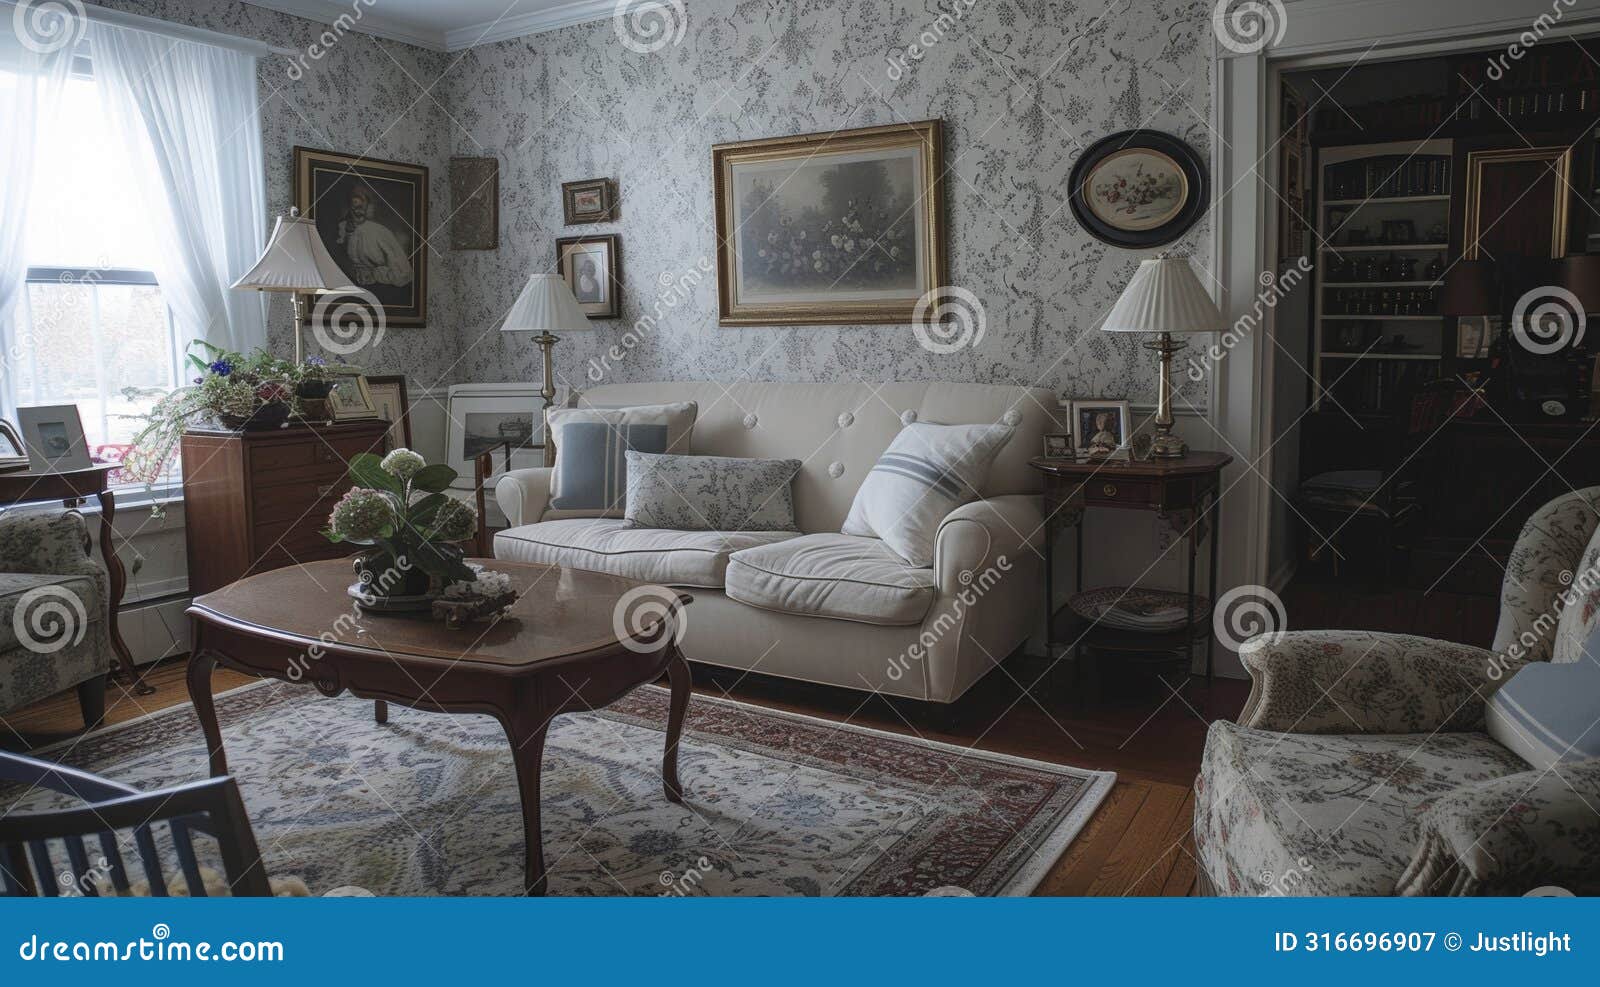 a plain and cramped living room with dated wallpaper and worn carpeting transformed into a cozy and elegant space. the